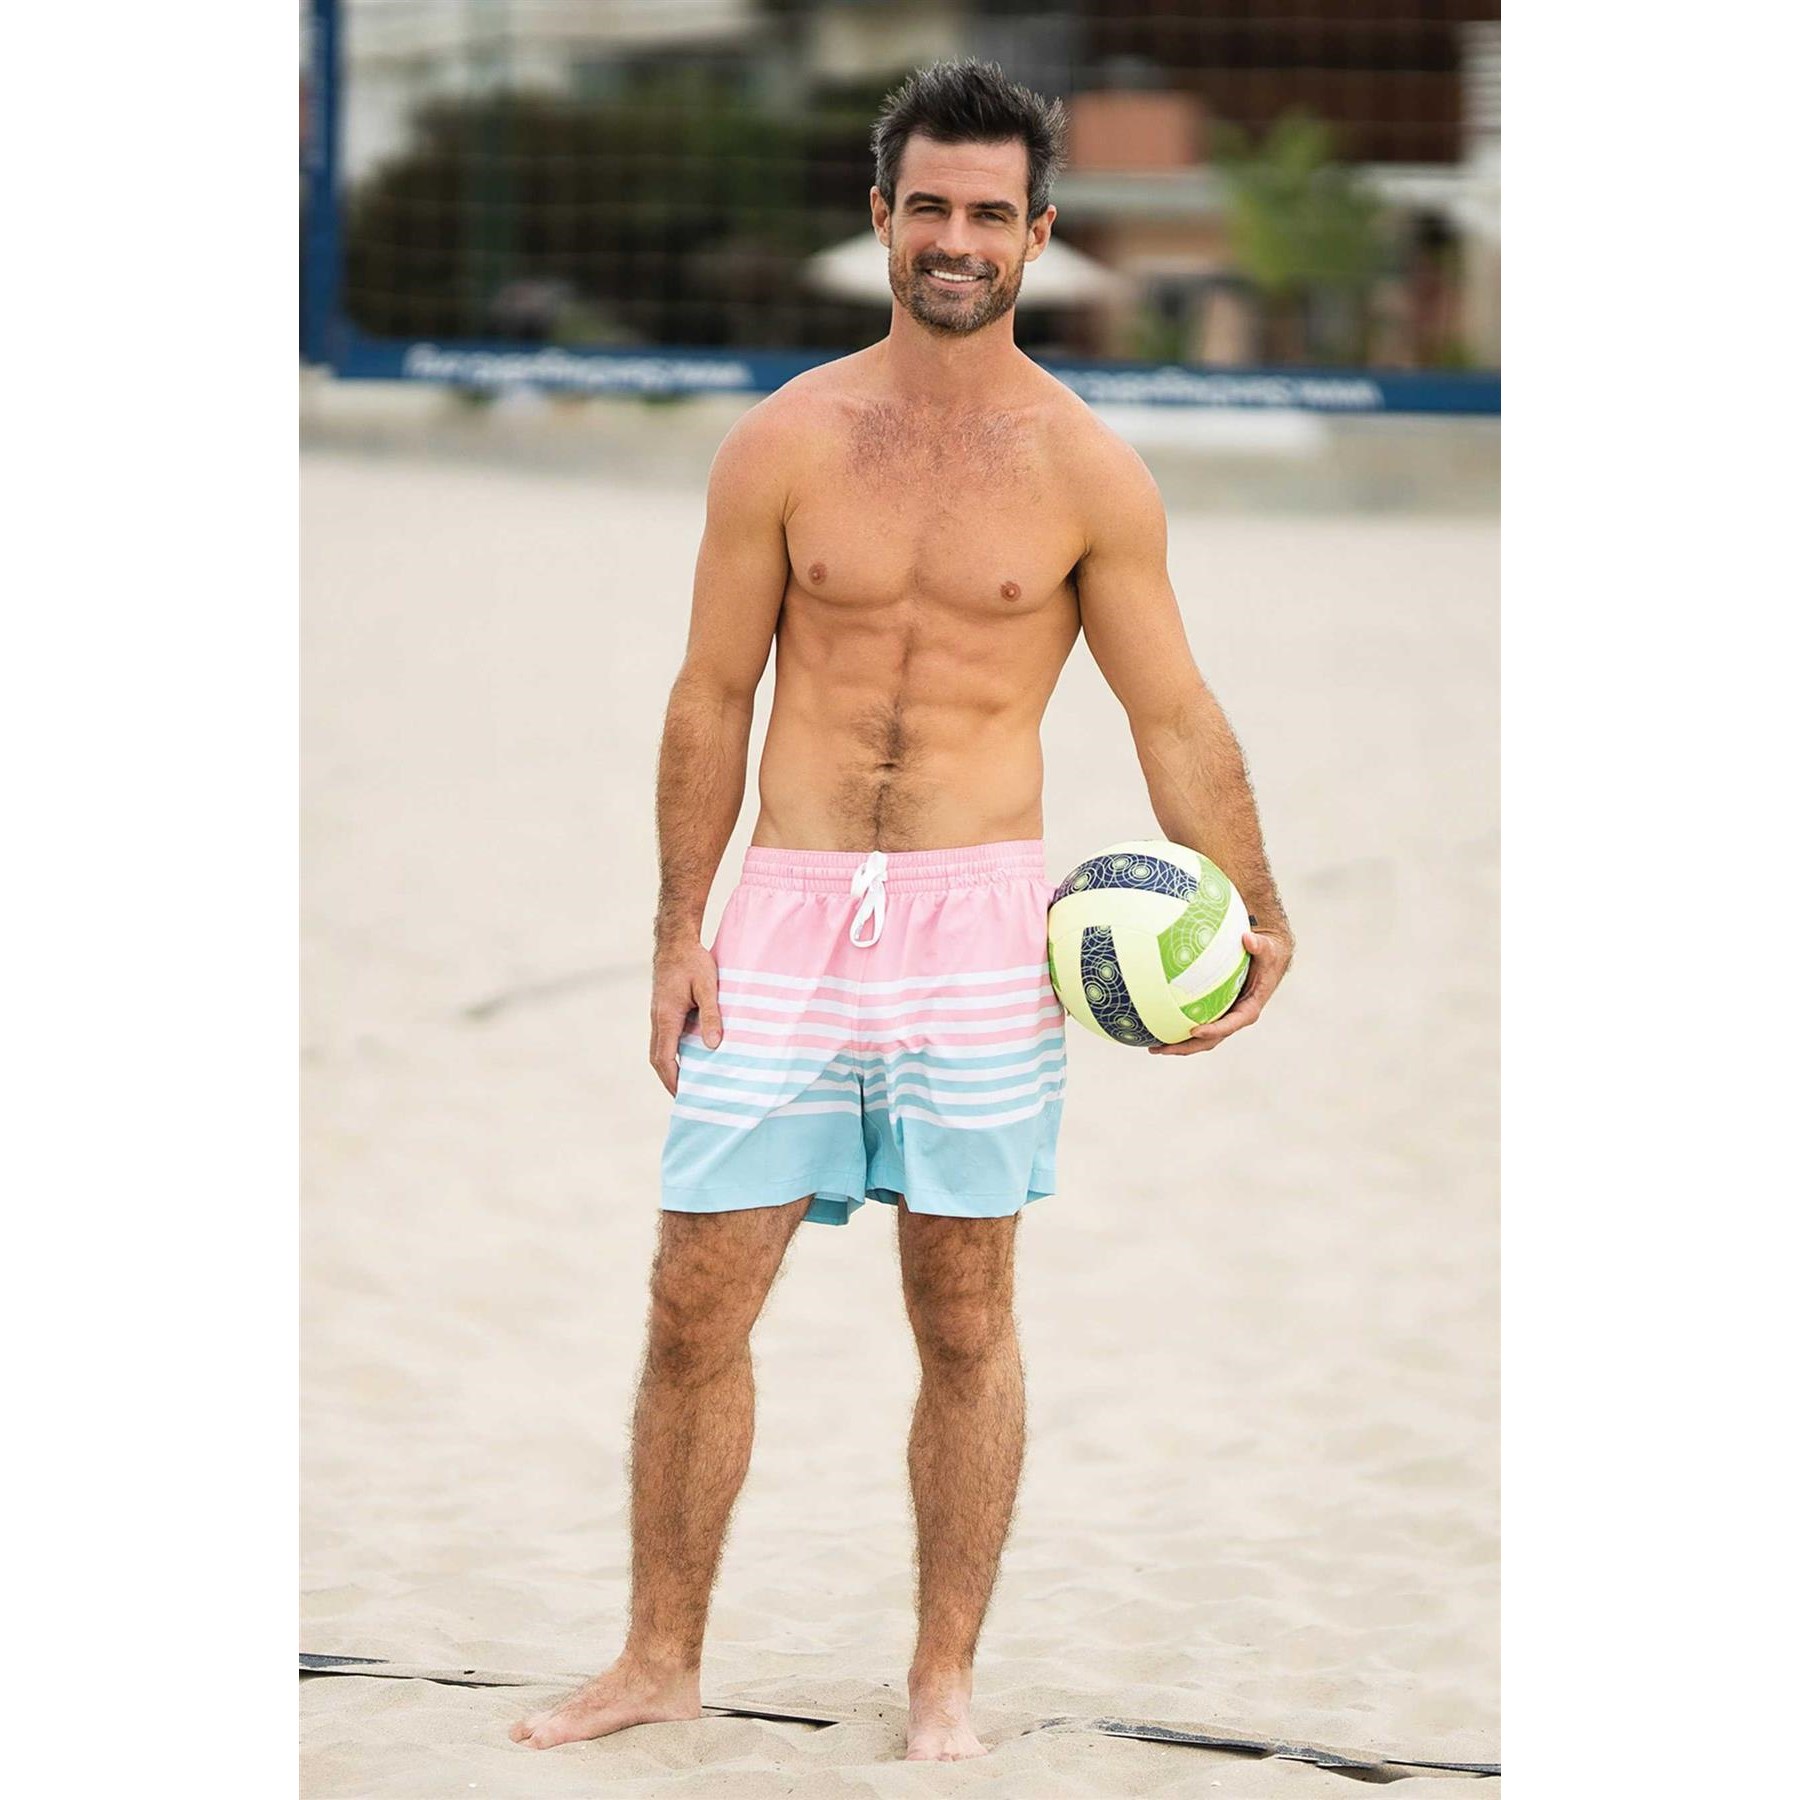 Topless male posed wearing swim trunks on beach holding volleyball